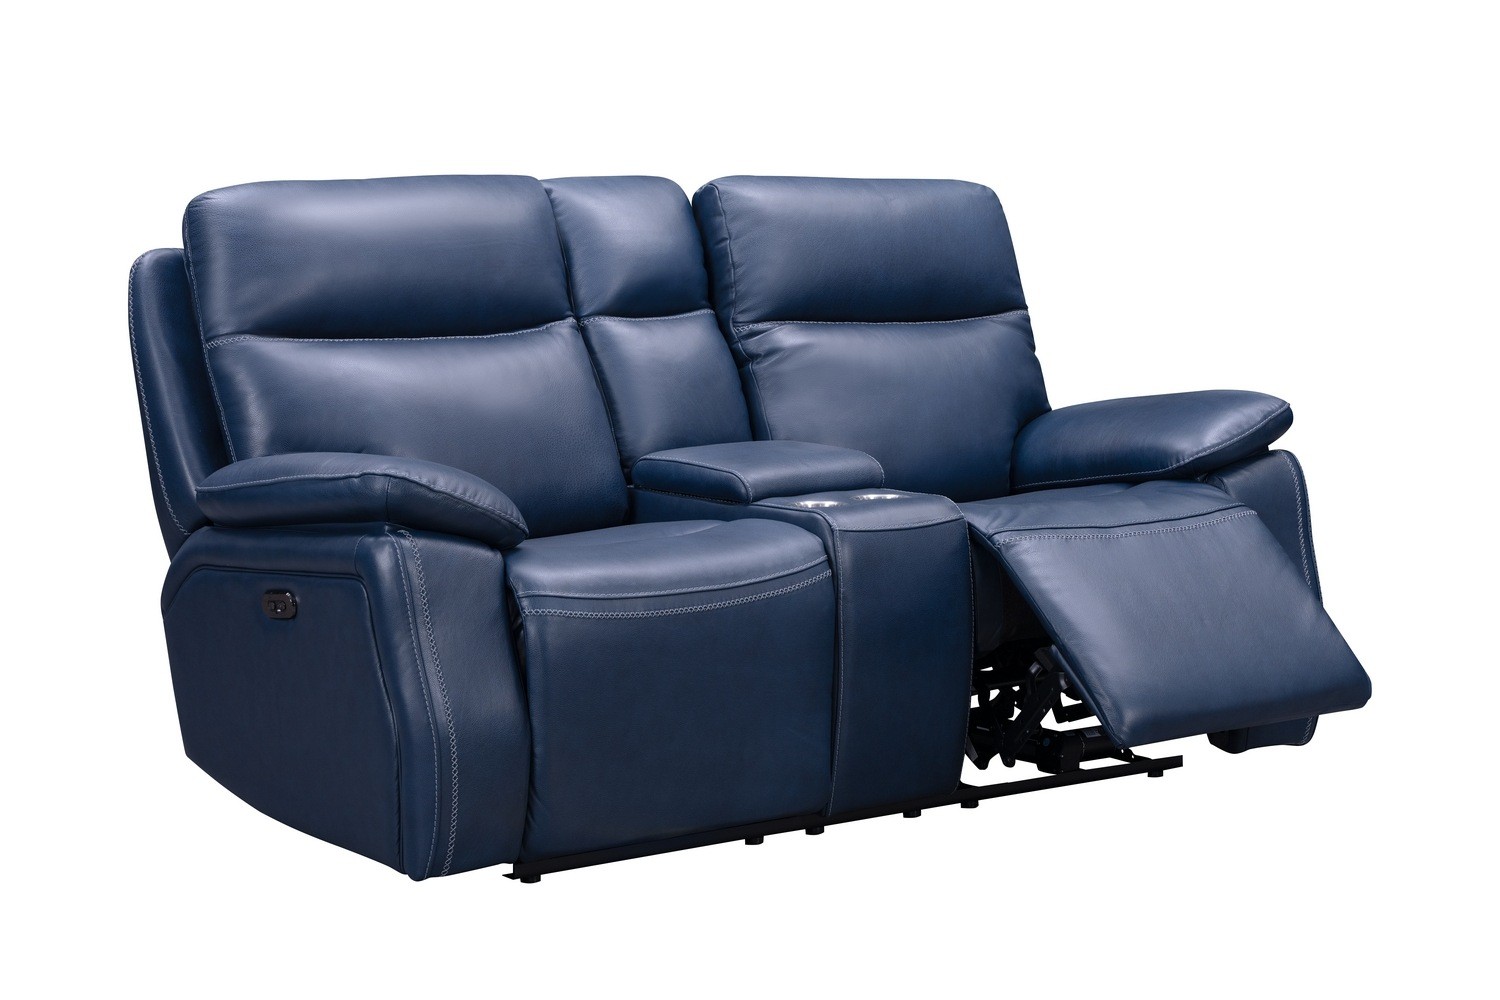 Barcalounger Micah Console Loveseat with Power Recline and Power Head Rests - Marco Navy Blue/Leather Match